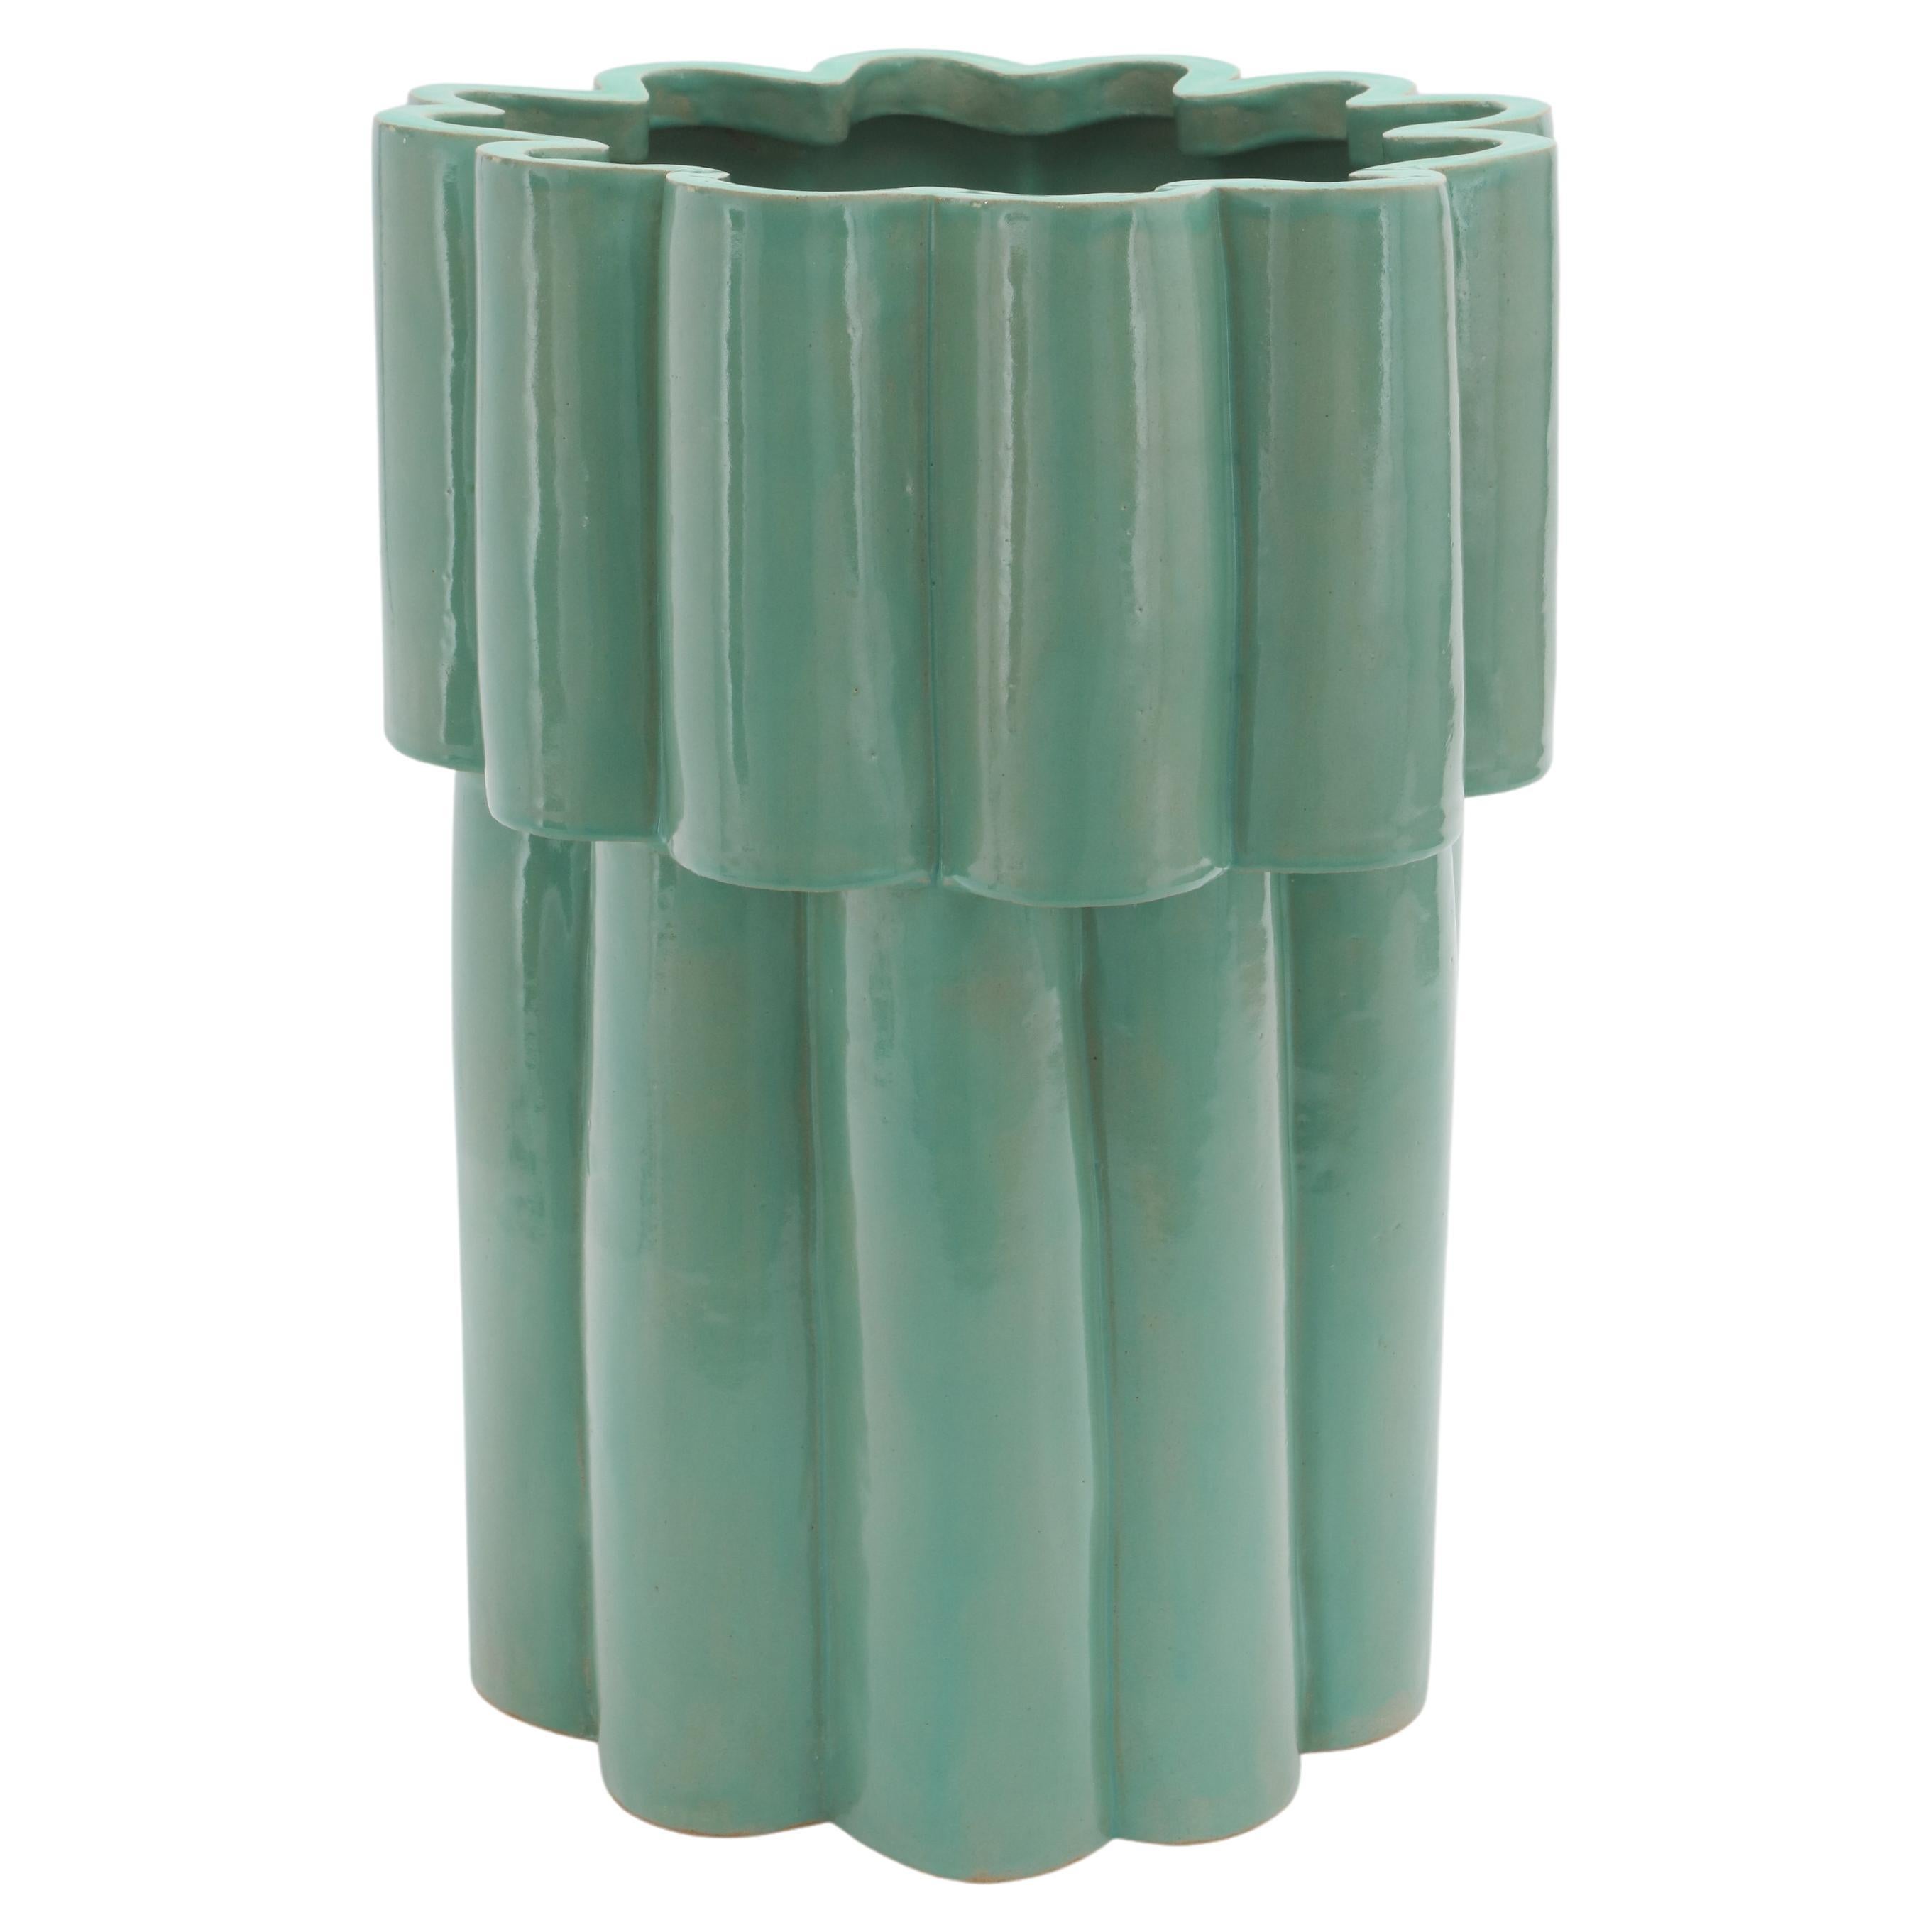 Two-Tier Cloud Ceramic Planter in Gloss Mint by Bzippy For Sale